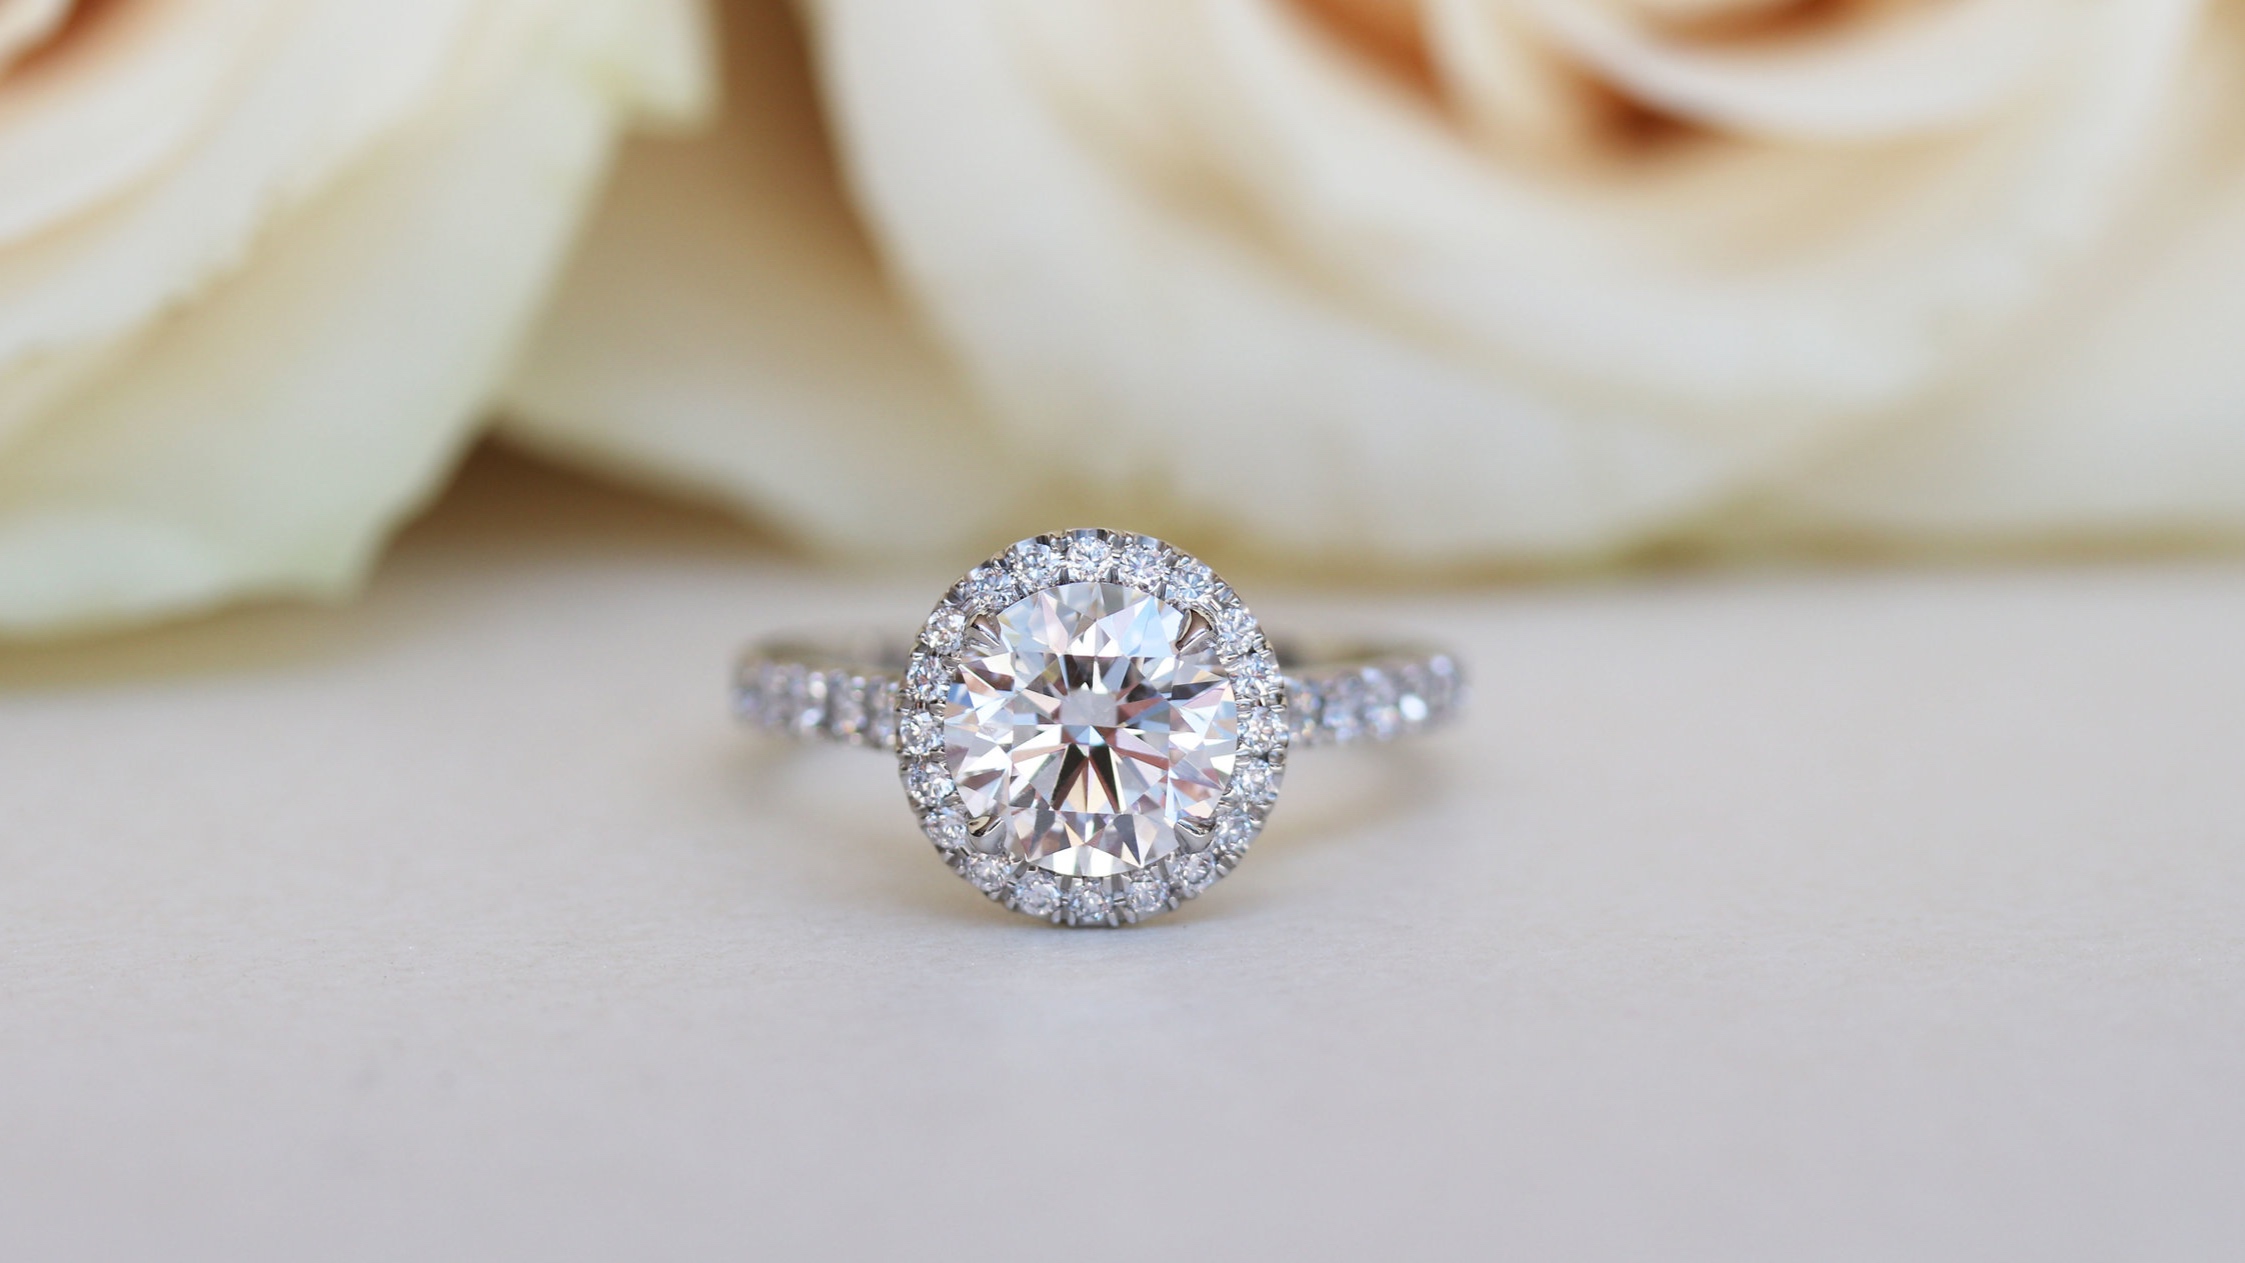 How to Care for Your Lab Grown Diamond Engagement Ring